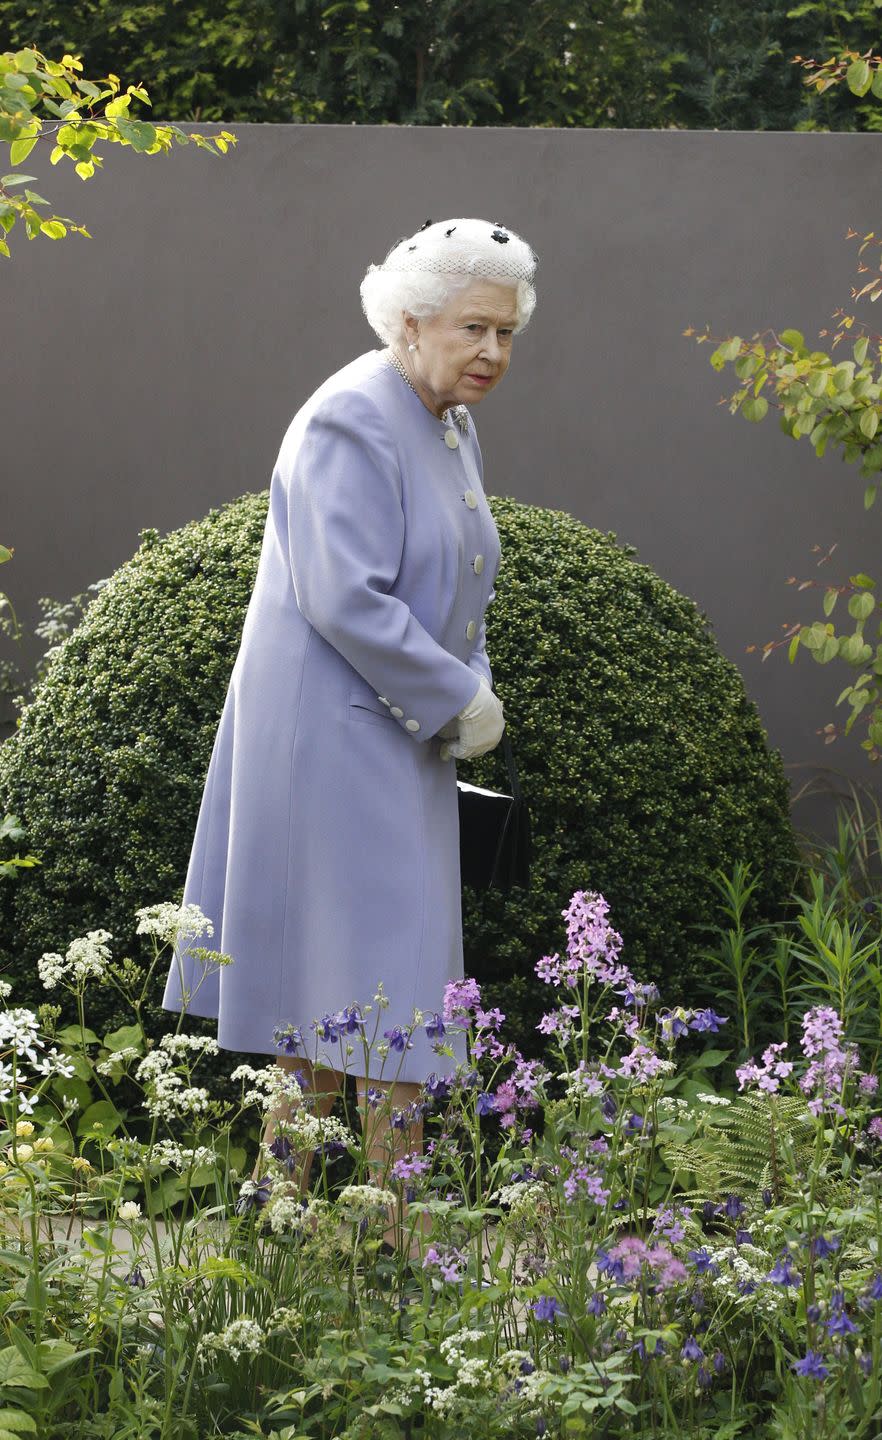 <p>In 2012, the Queen was presented with a brooch from the Royal Horticultural Society to commemorate her Diamond Jubilee.<br></p>